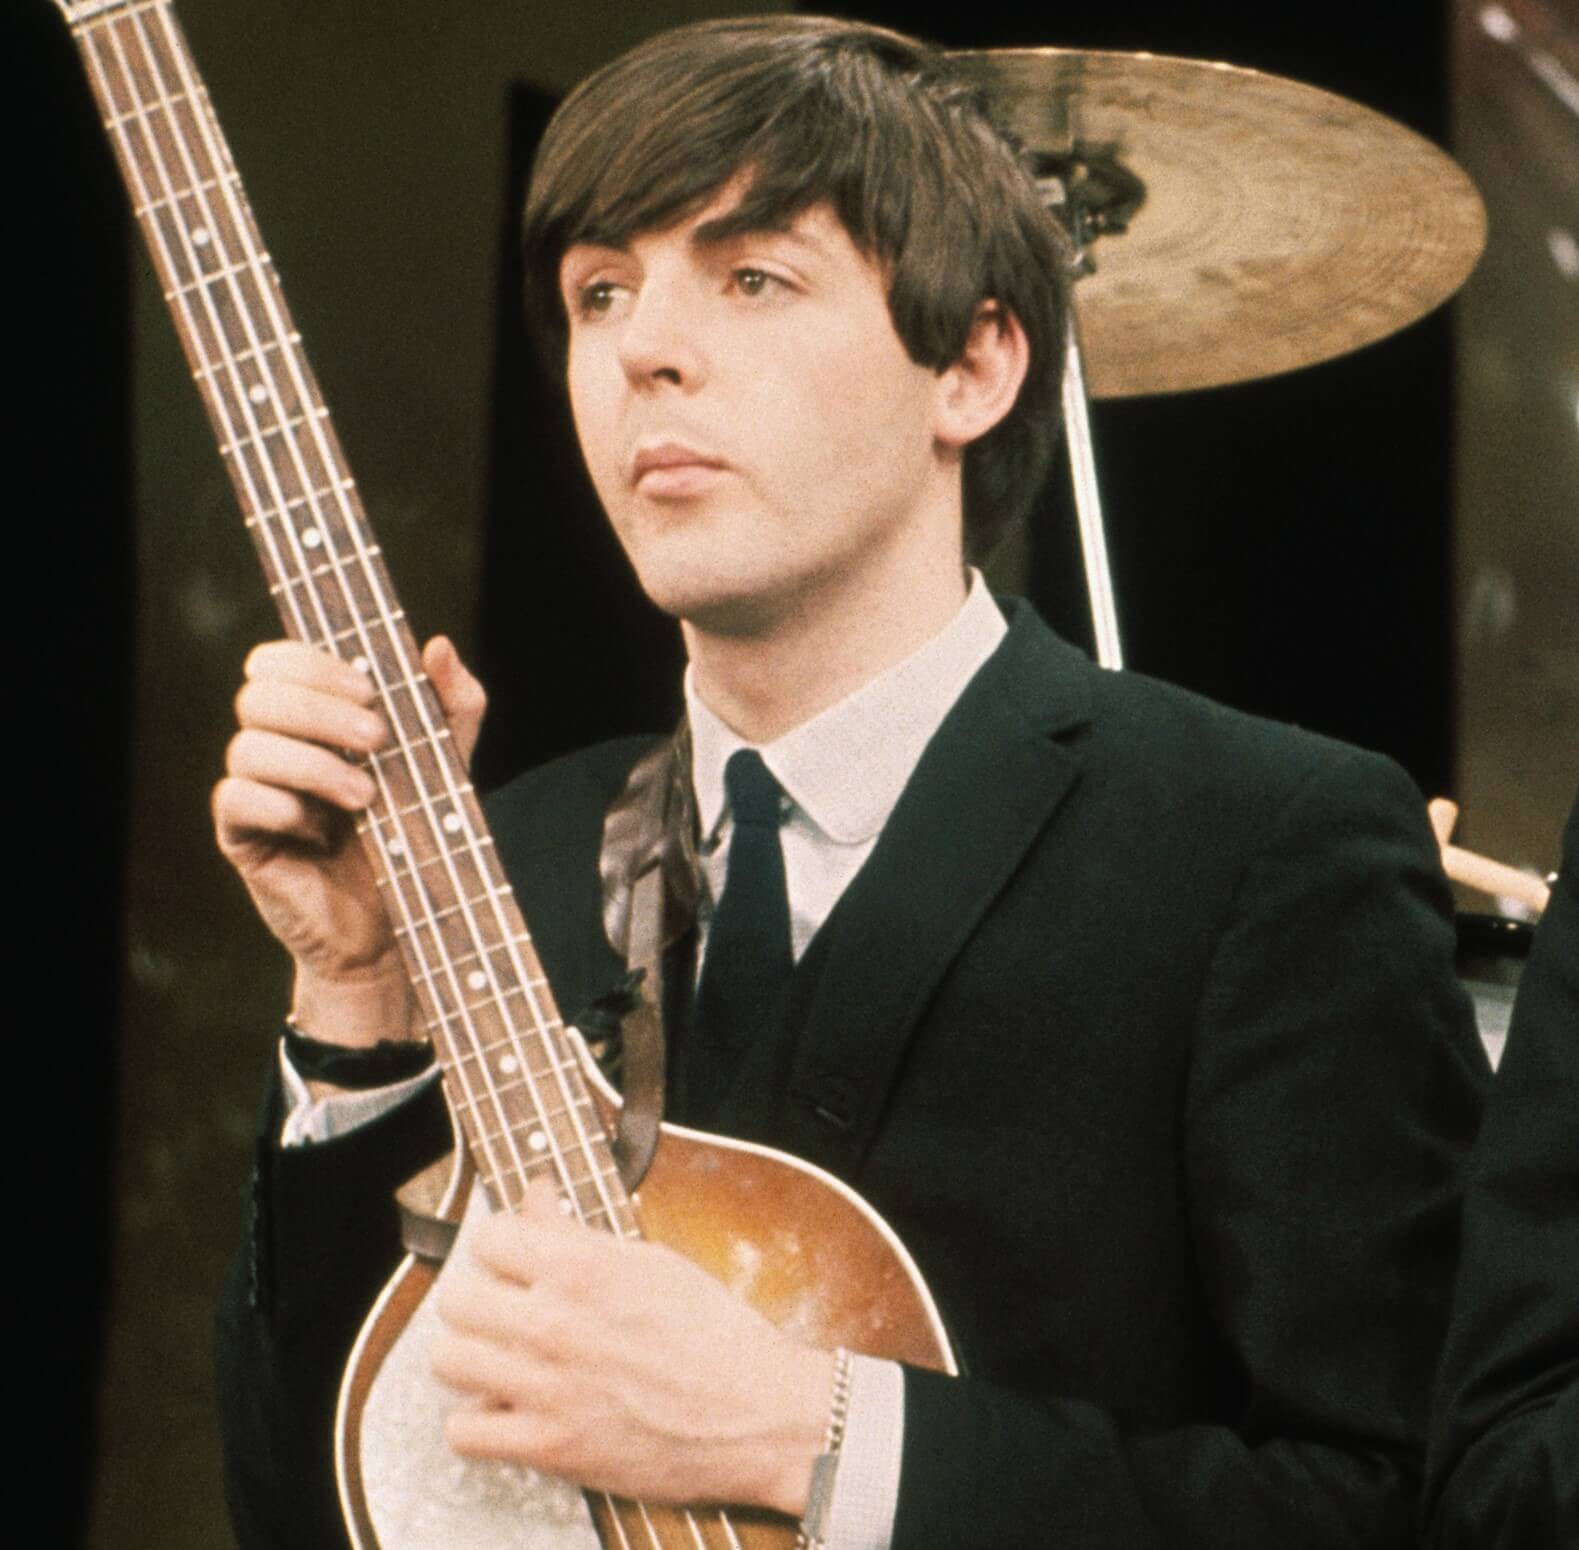 Paul McCartney playing a song on an instrument